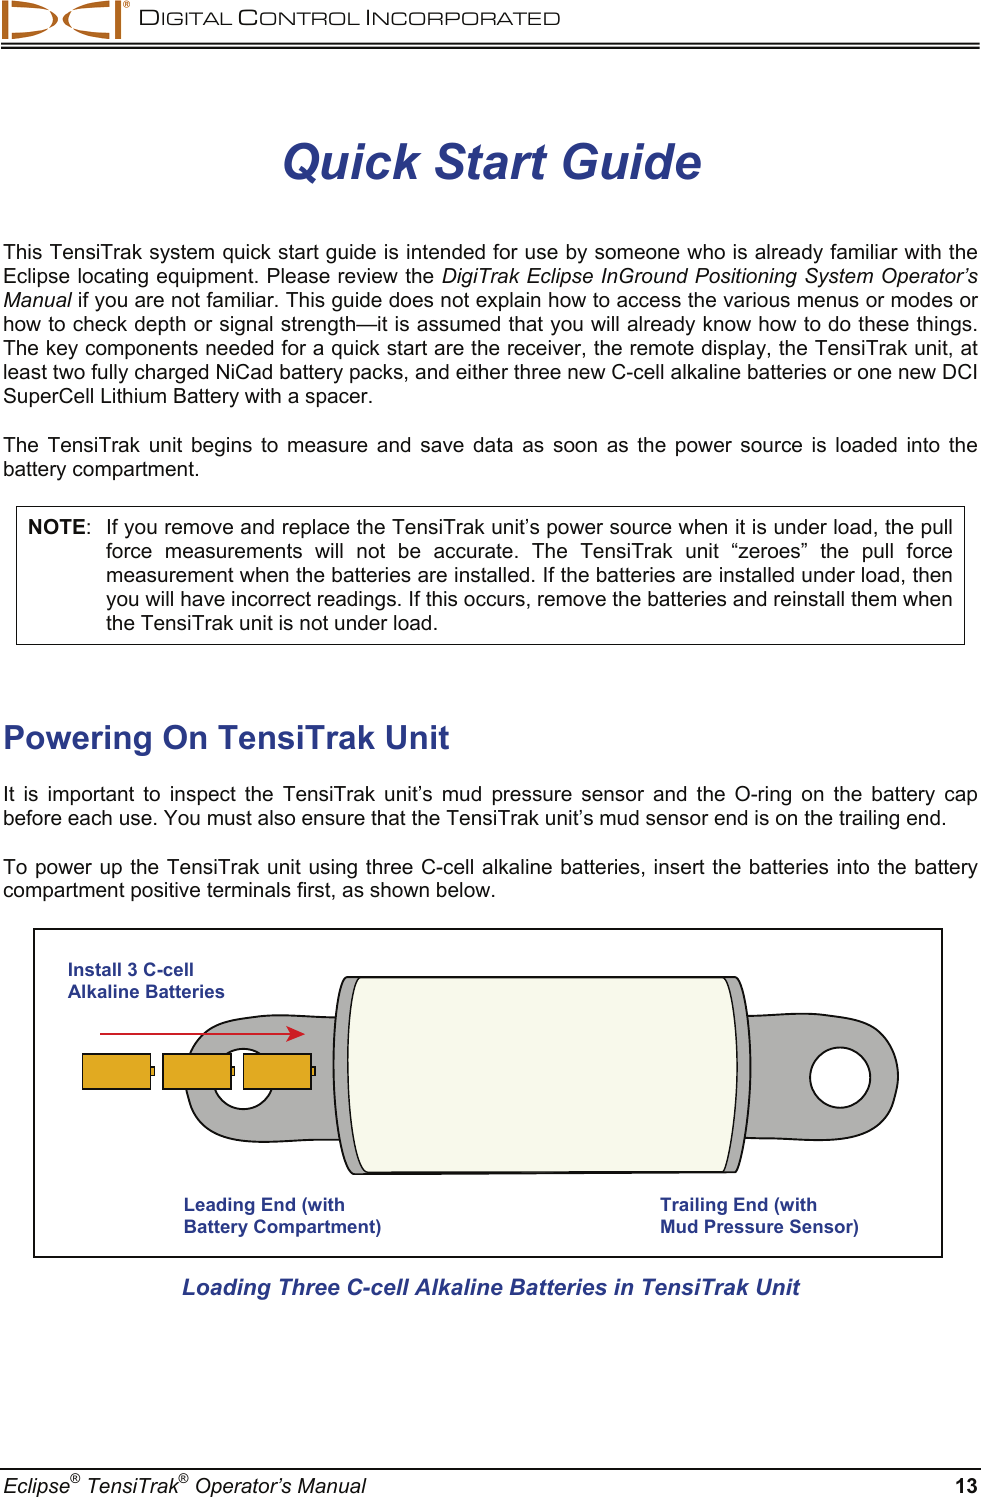  DIGITAL CONTROL INCORPORATED  Eclipse® TensiTrak® Operator’s Manual  13 Quick Start Guide This TensiTrak system quick start guide is intended for use by someone who is already familiar with the Eclipse locating equipment. Please review the DigiTrak Eclipse InGround Positioning System Operator’s Manual if you are not familiar. This guide does not explain how to access the various menus or modes or how to check depth or signal strength—it is assumed that you will already know how to do these things. The key components needed for a quick start are the receiver, the remote display, the TensiTrak unit, at least two fully charged NiCad battery packs, and either three new C-cell alkaline batteries or one new DCI SuperCell Lithium Battery with a spacer. The TensiTrak unit begins to measure and save data as soon as the power source is loaded into the battery compartment.  NOTE:  If you remove and replace the TensiTrak unit’s power source when it is under load, the pull force measurements will not be accurate. The TensiTrak unit “zeroes” the pull force measurement when the batteries are installed. If the batteries are installed under load, then you will have incorrect readings. If this occurs, remove the batteries and reinstall them when the TensiTrak unit is not under load.  Powering On TensiTrak Unit It is important to inspect the TensiTrak unit’s mud pressure sensor and the O-ring on the battery cap before each use. You must also ensure that the TensiTrak unit’s mud sensor end is on the trailing end.  To power up the TensiTrak unit using three C-cell alkaline batteries, insert the batteries into the battery compartment positive terminals first, as shown below.    Loading Three C-cell Alkaline Batteries in TensiTrak Unit   Leading End (with Battery Compartment) Trailing End (with  Mud Pressure Sensor) Install 3 C-cell Alkaline Batteries 